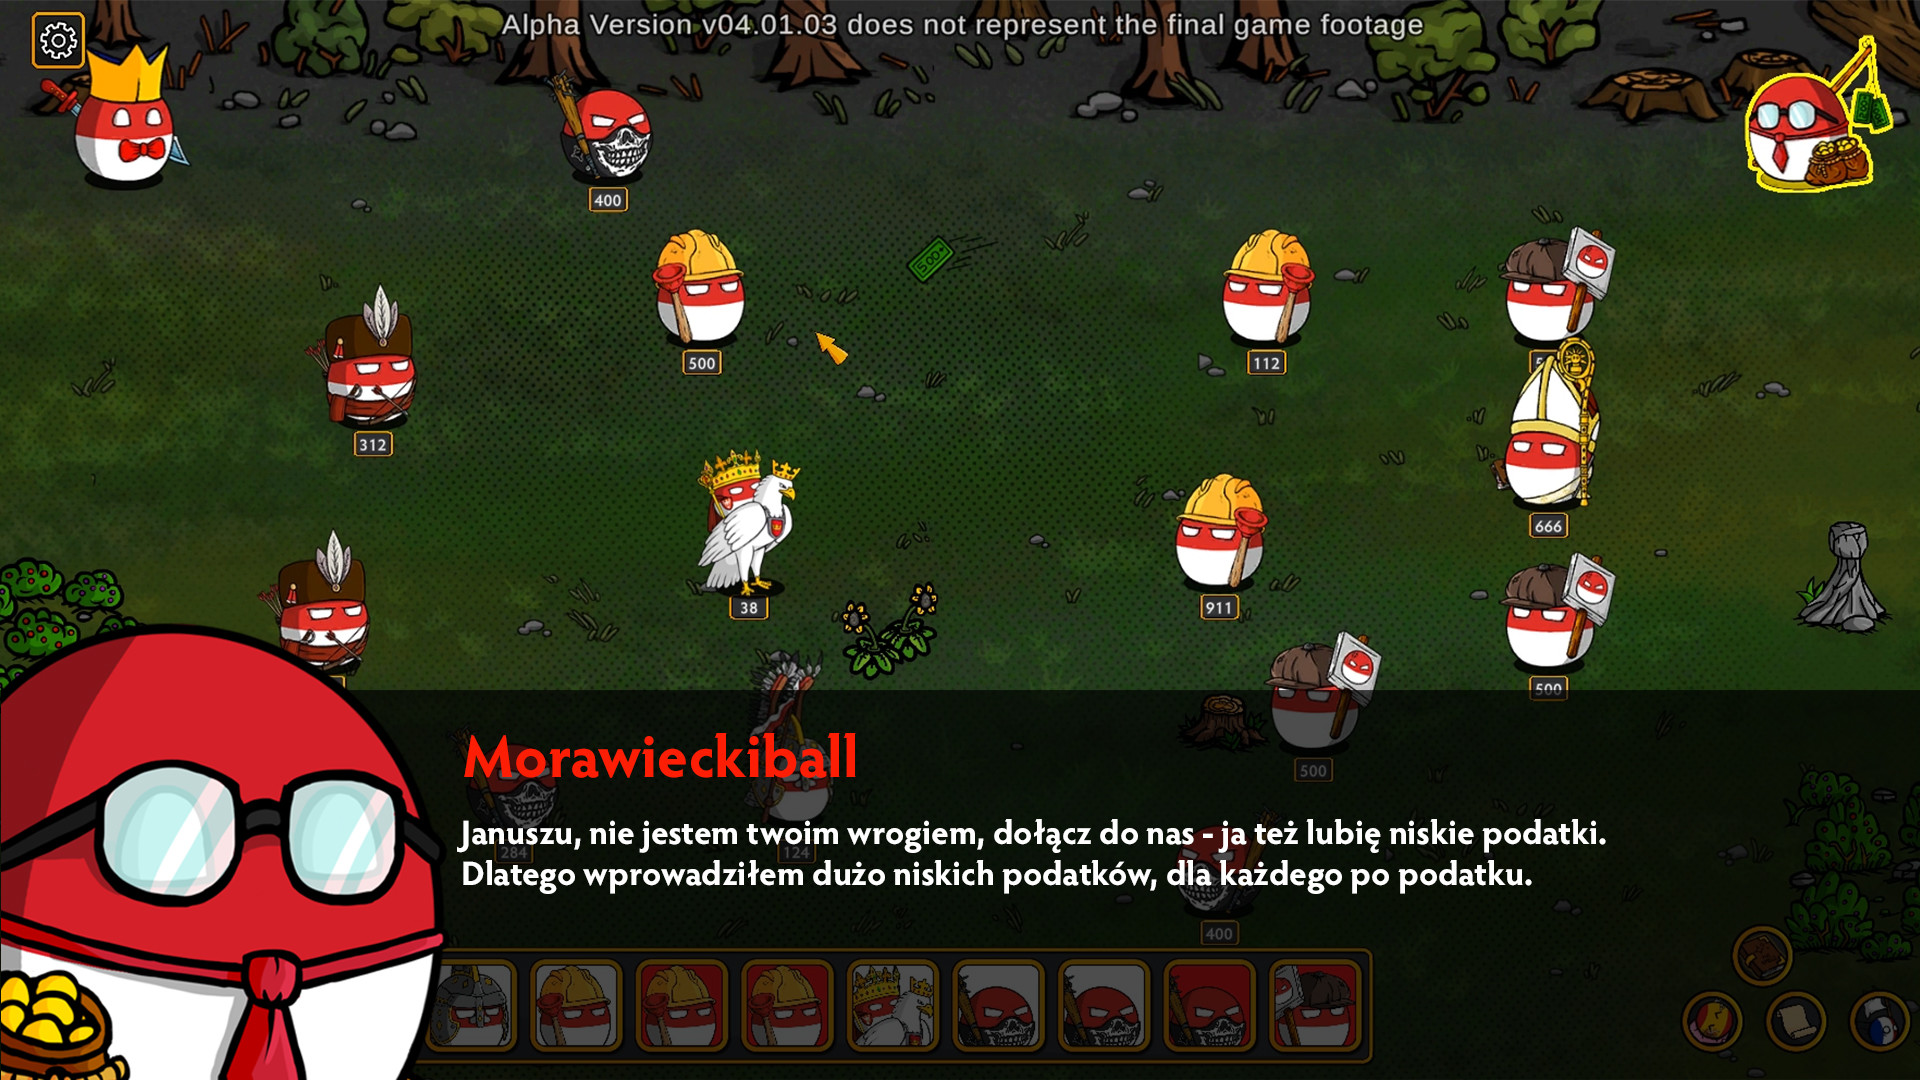 download countryballs heroes free download